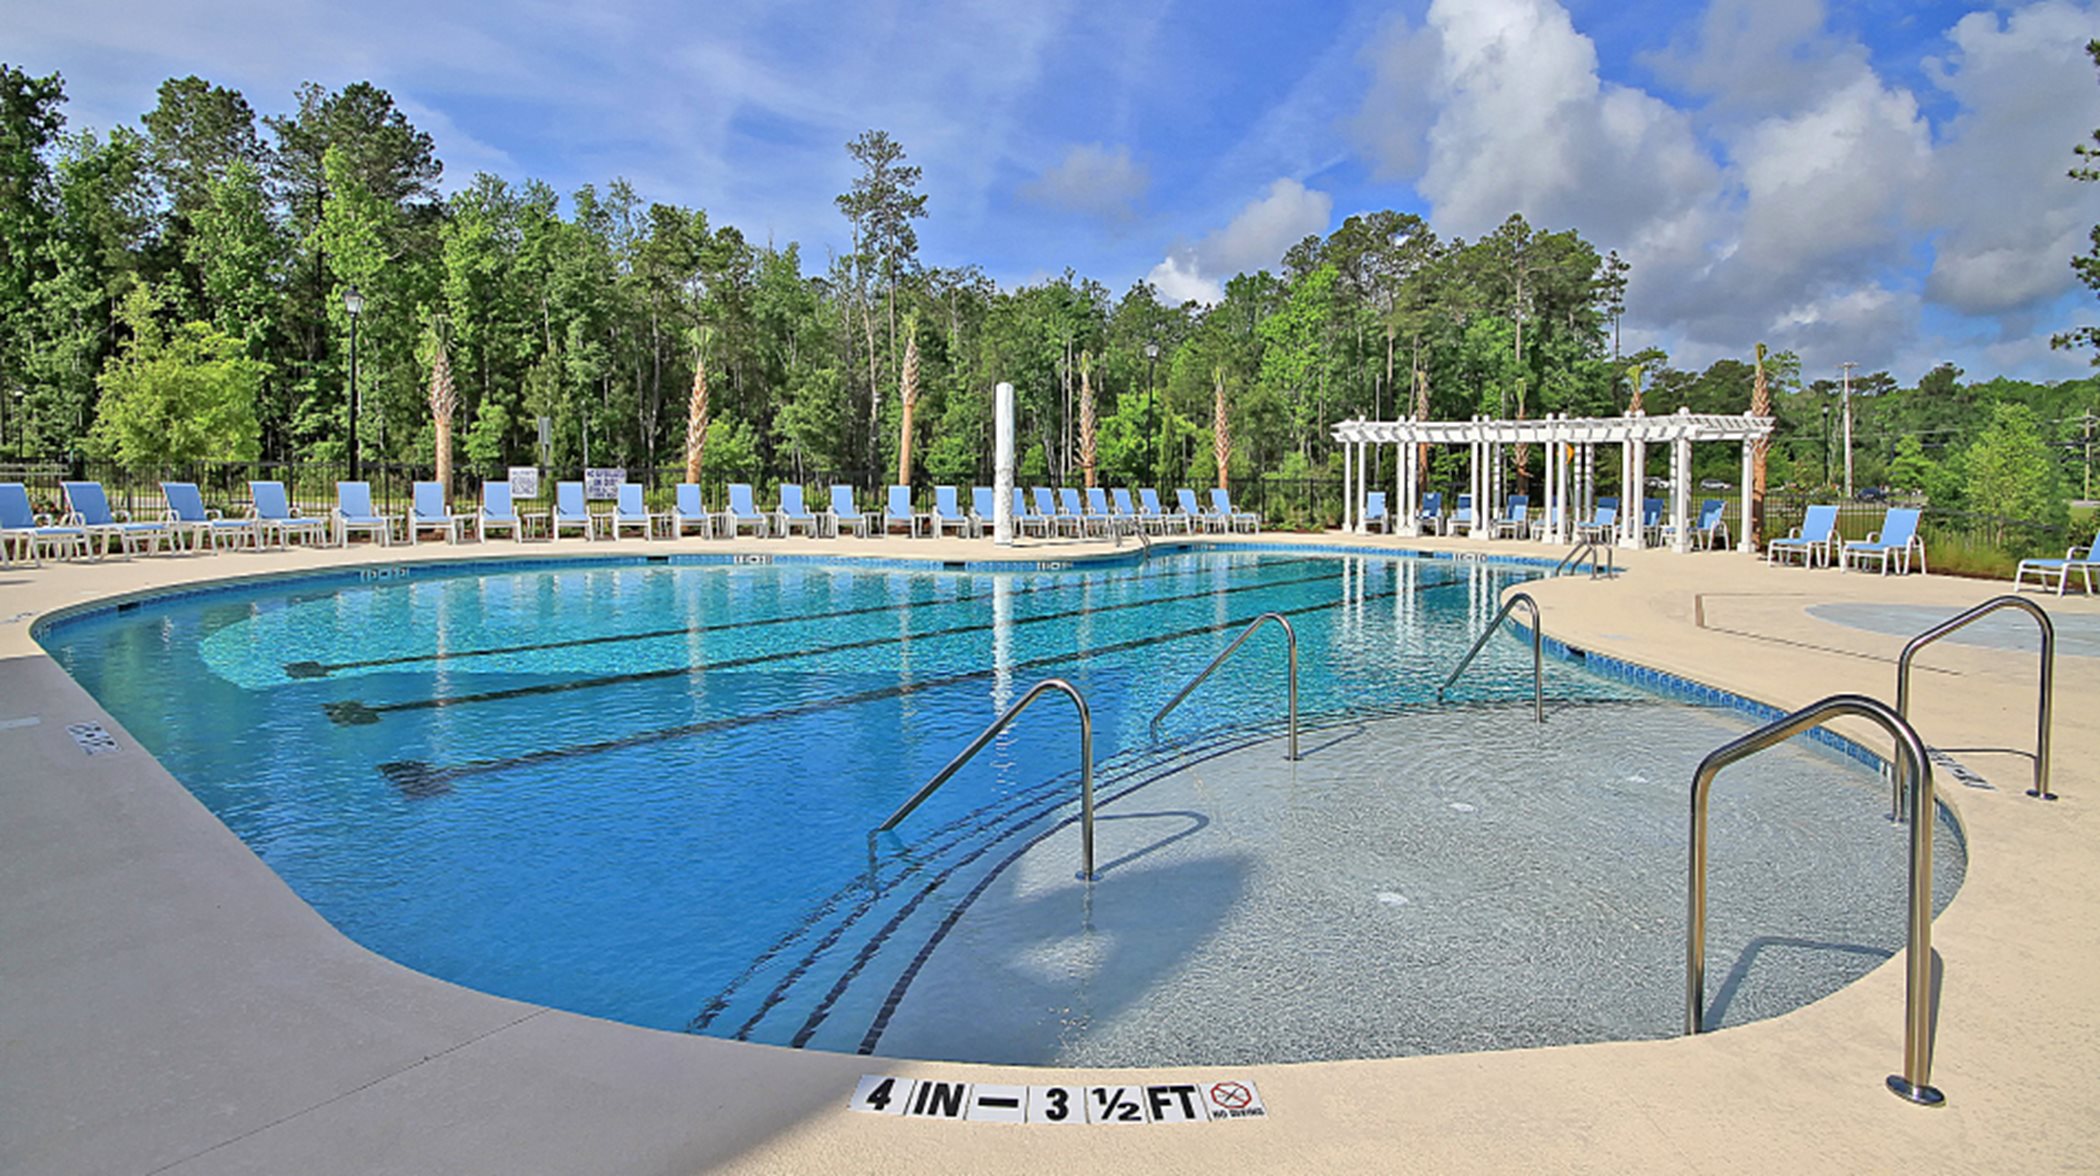 View of pool in daytime